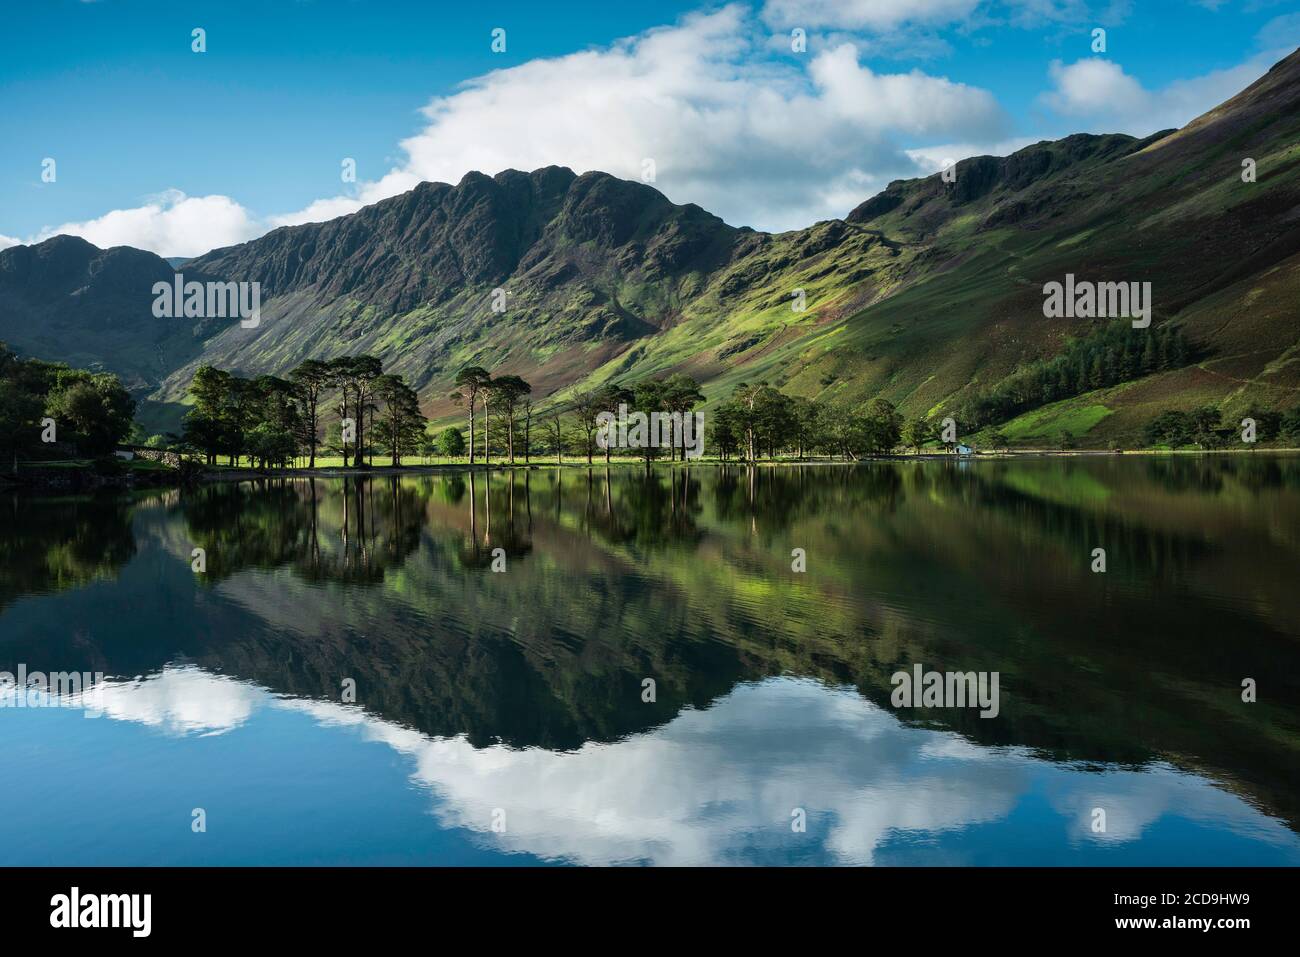 Dappled light on the famous Buttermere pines, reflected in the lake on a calm sunny summer morning.  Buttermere, Lake District, Cumbria, England, UK Stock Photo